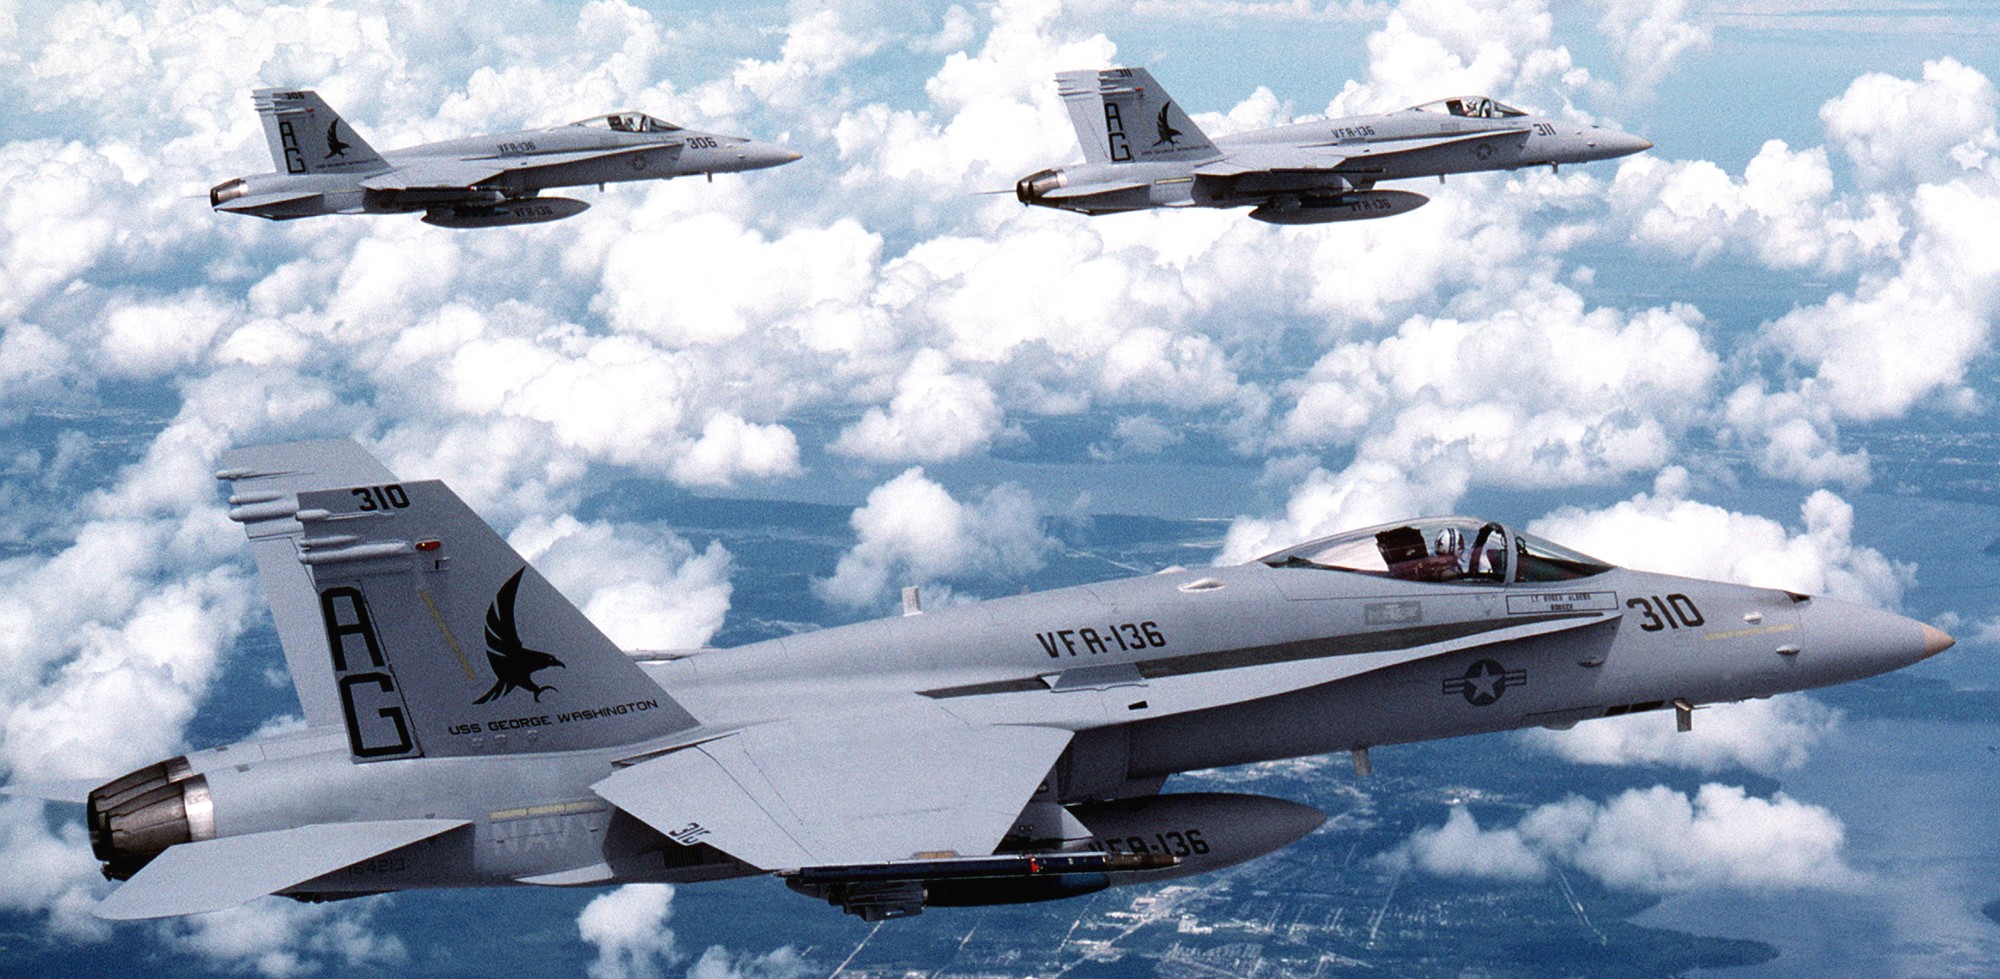 vfa-136 knighthawks strike fighter squadron f/a-18c hornet 1992 58 cvw-7 carrier air wing